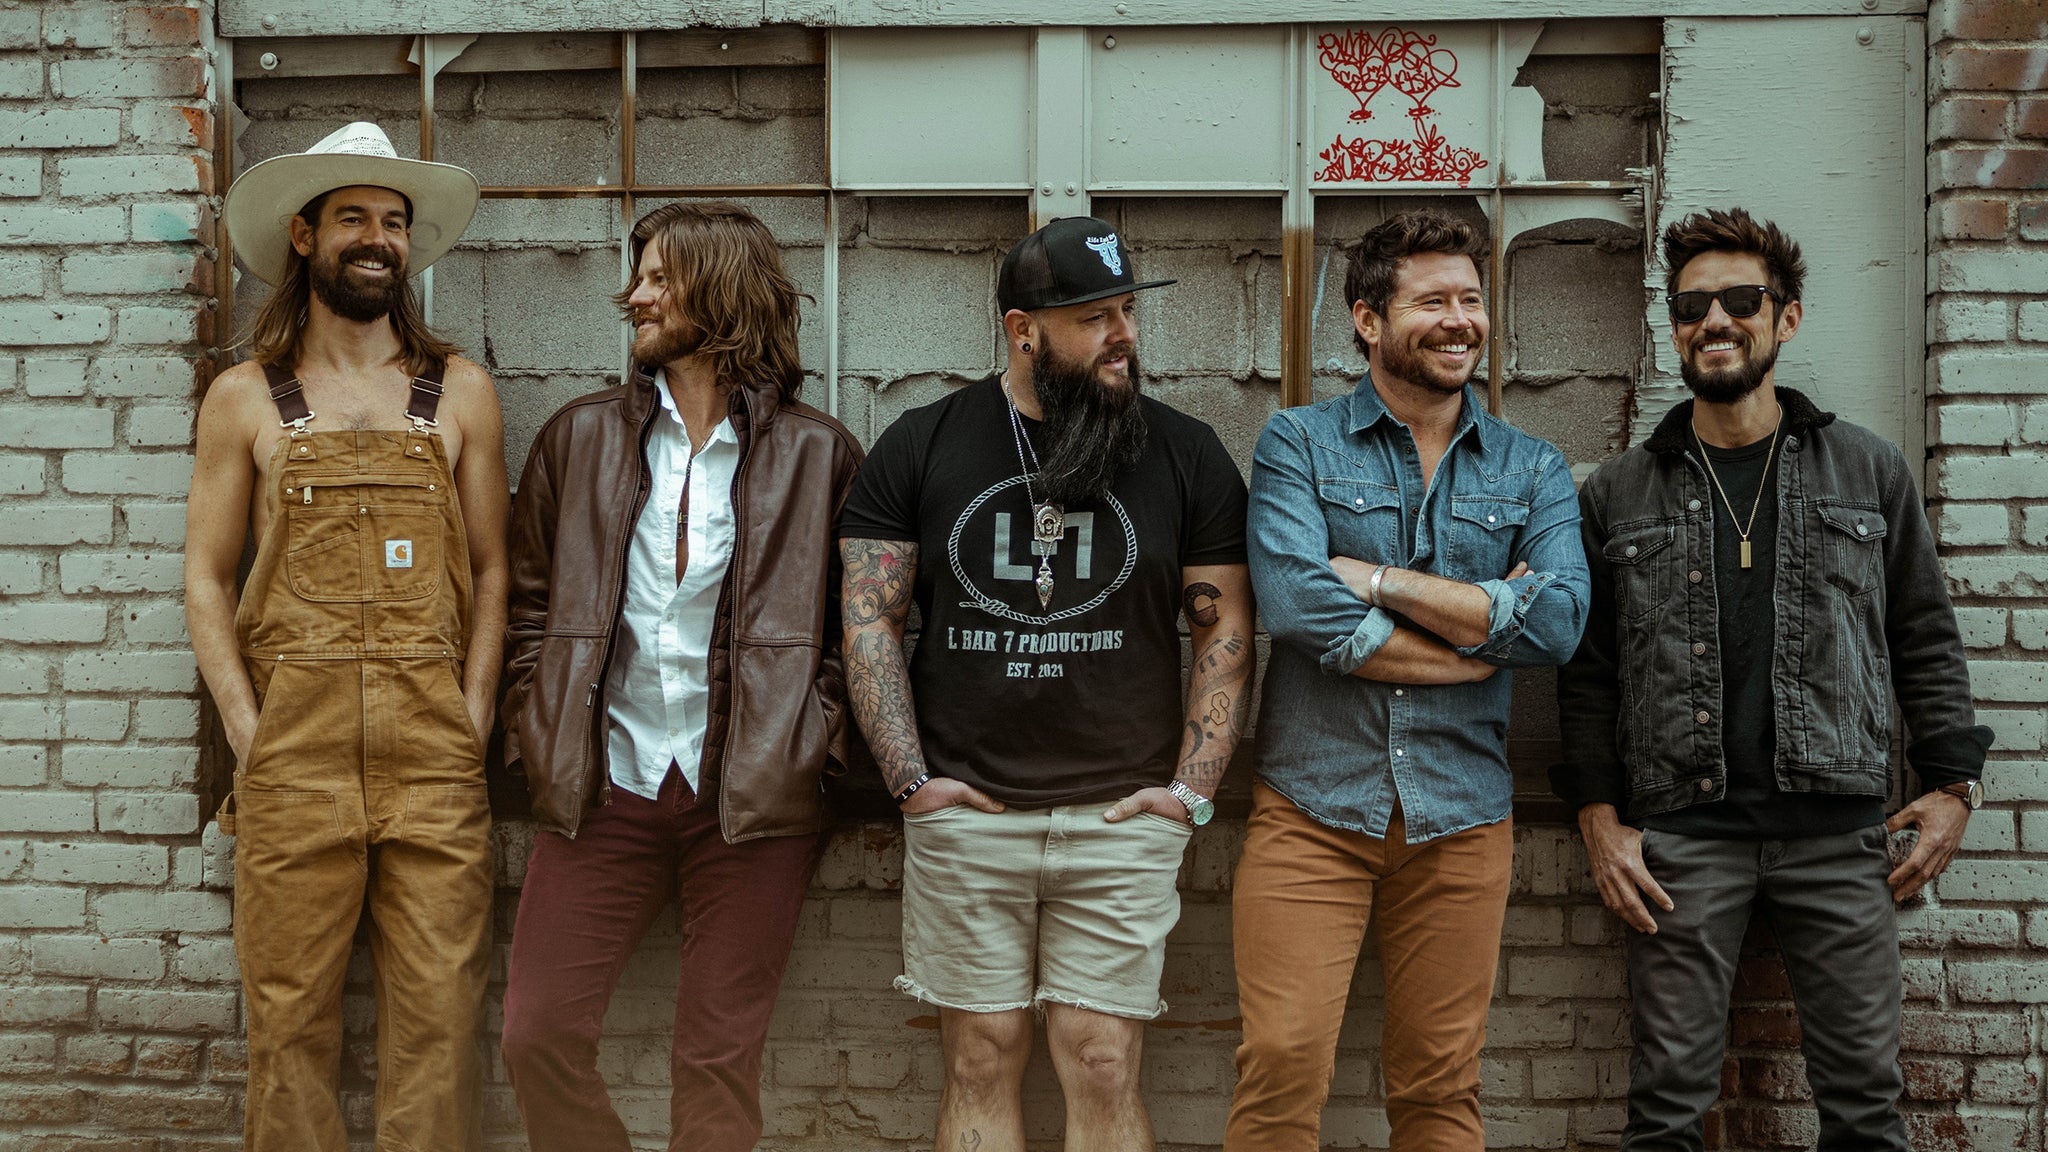 Shane Smith and the Saints in Charlottesville promo photo for VIP Onsale presale offer code